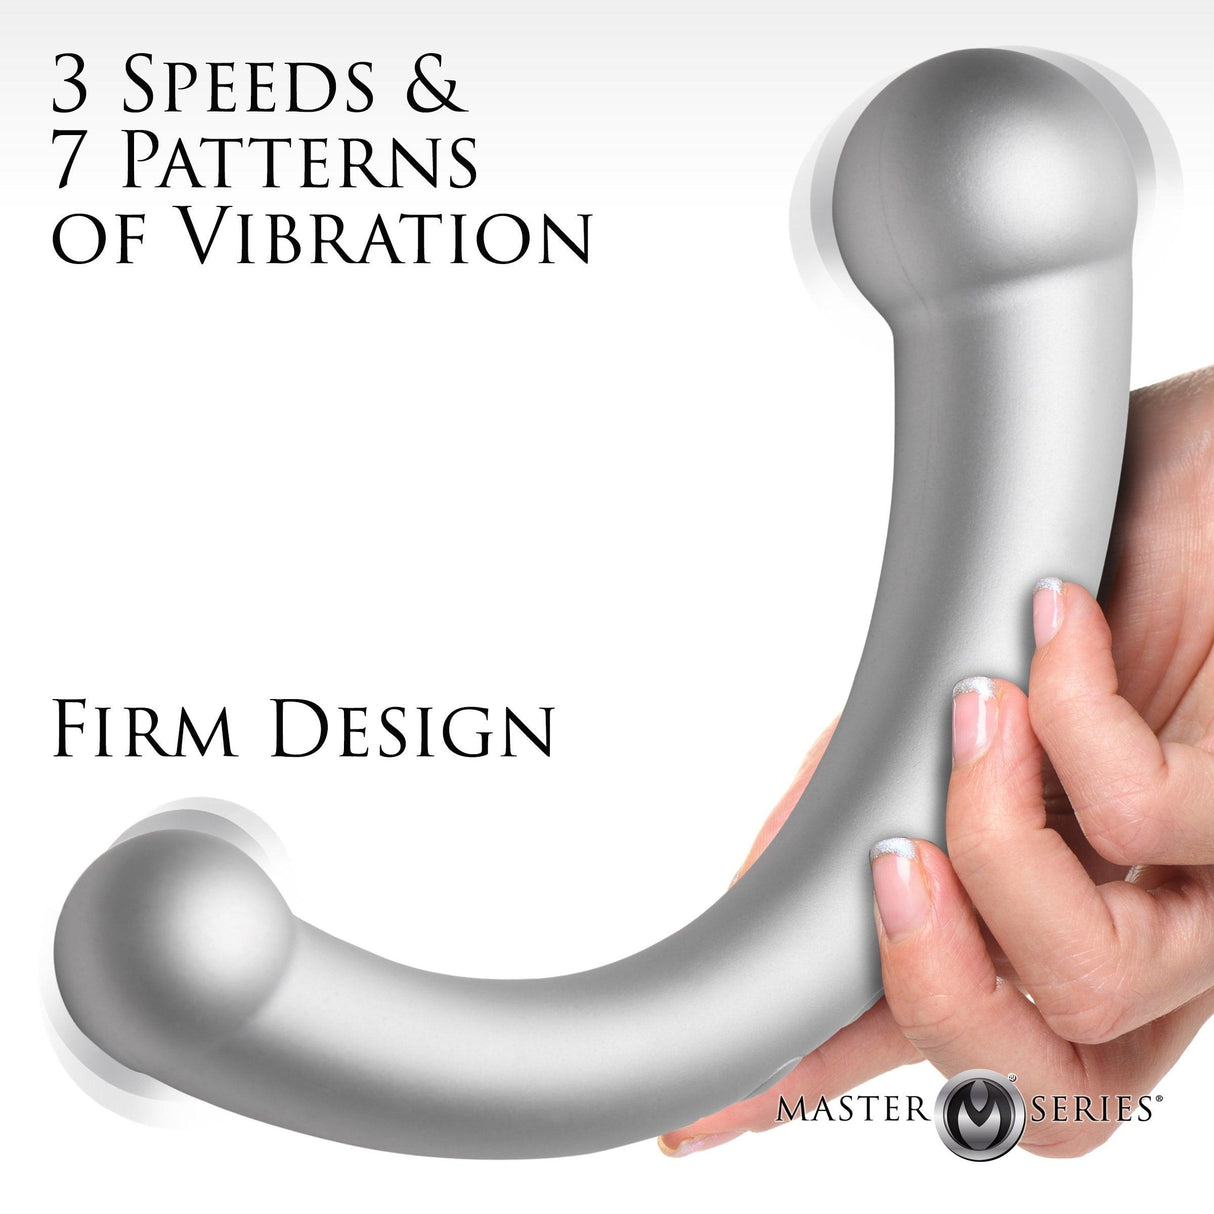 Master Series 10x Vibrating Silicone Dual-ended Dildo